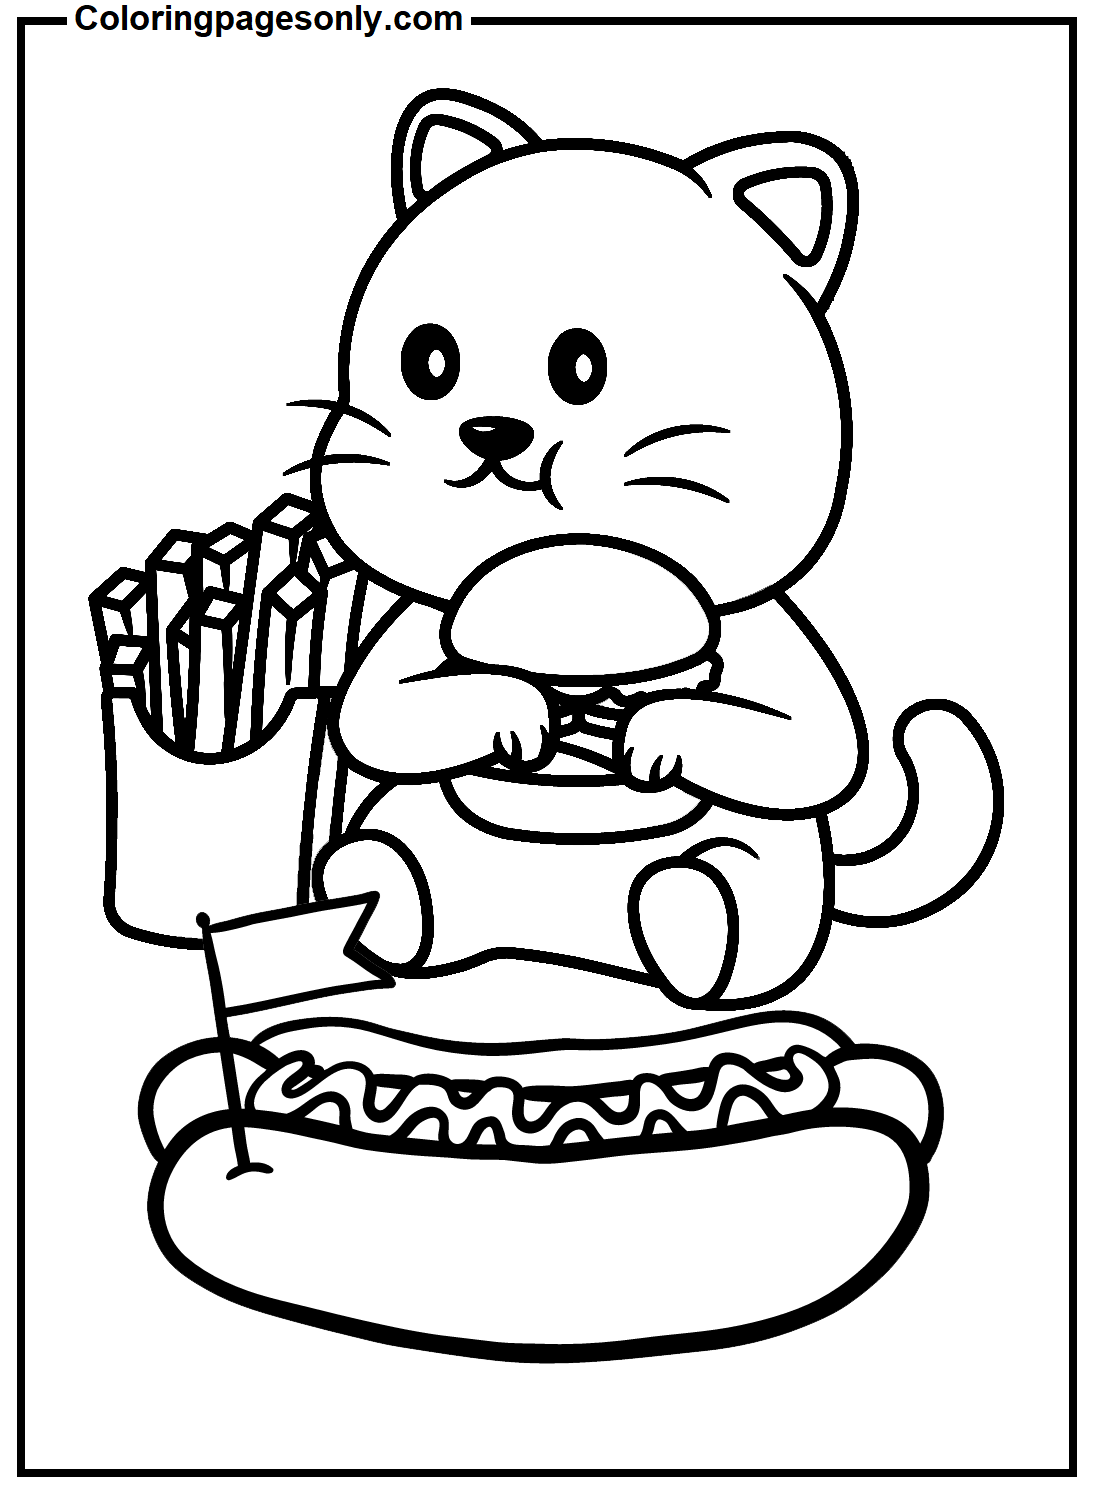 Festa Junina Hot Dog With Cat Coloring Pages